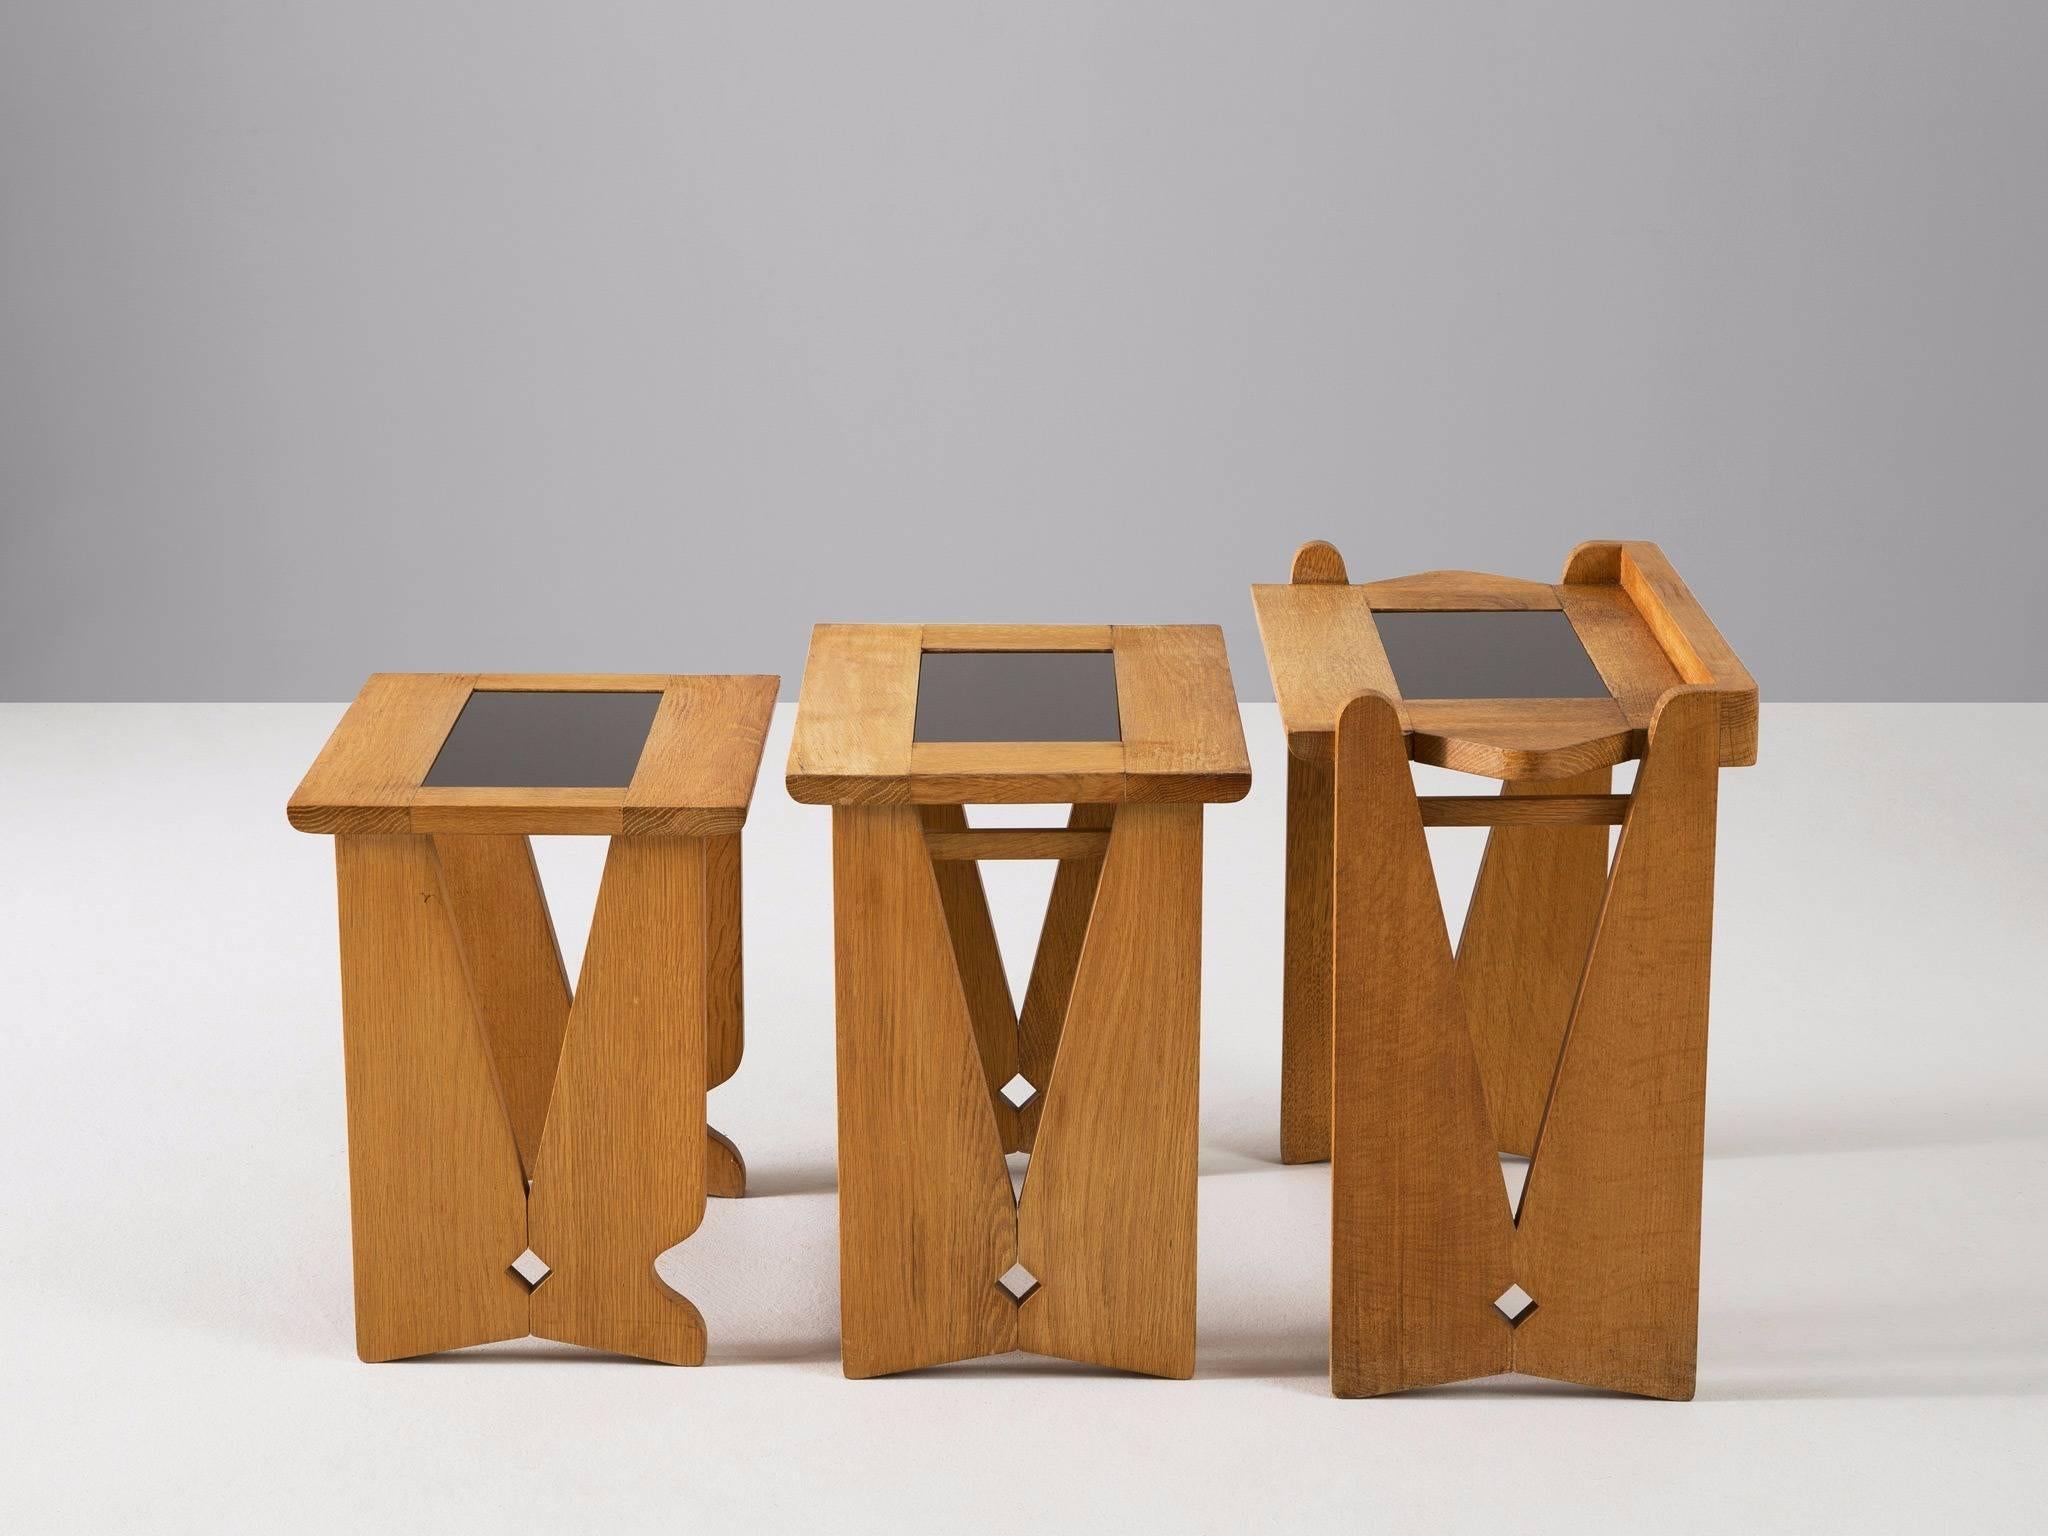 Set of three nesting tables, in oak and glass, by Robert Guillerme et Jacques Chambron for Votre Maison, France, 1960s.
 
Set of three side tables in oak and glass by French designer duo Guillerme and Chambron. A simplistic design with open